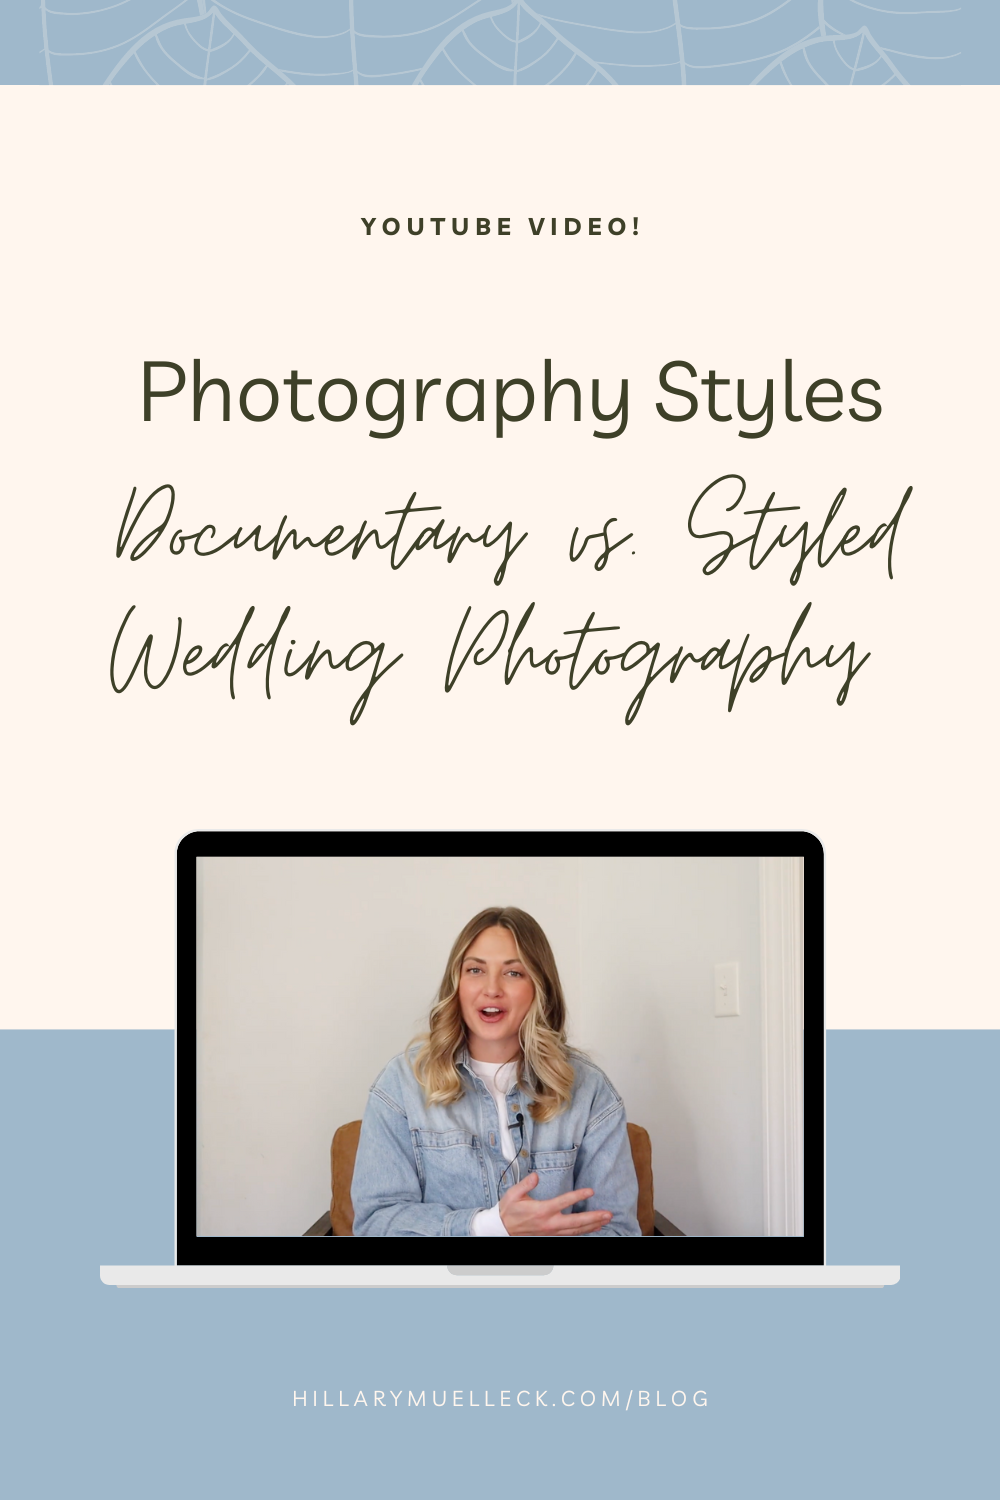 Wedding photographer Hillary Muelleck shares her opinions on documentary vs. styled photography for photographers and couples